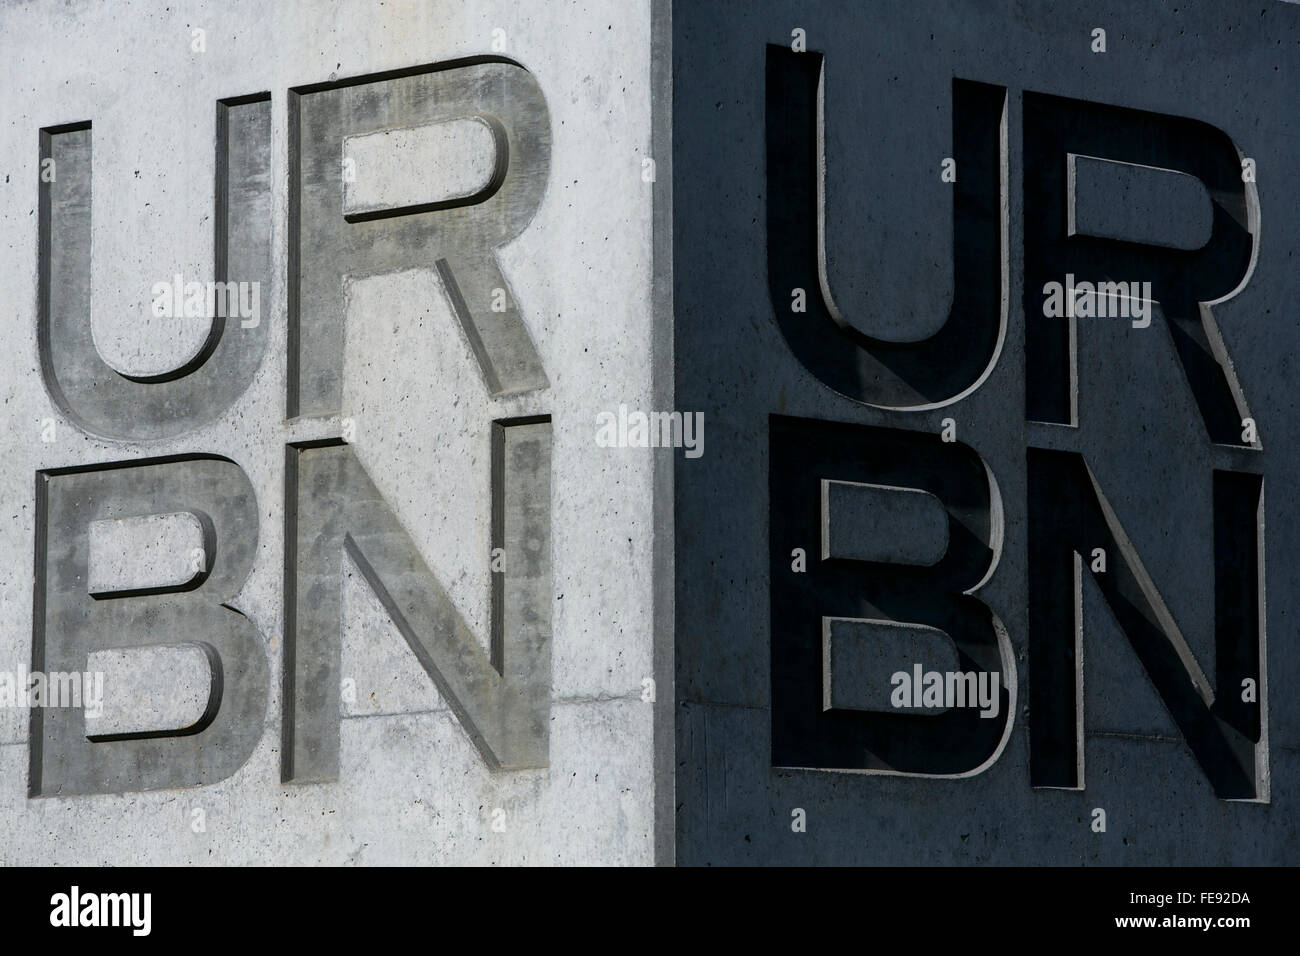 A logo sign outside of an Urban Outfitters, Inc., distribution center in Lancaster, Pennsylvania on January 3, 2016. Stock Photo